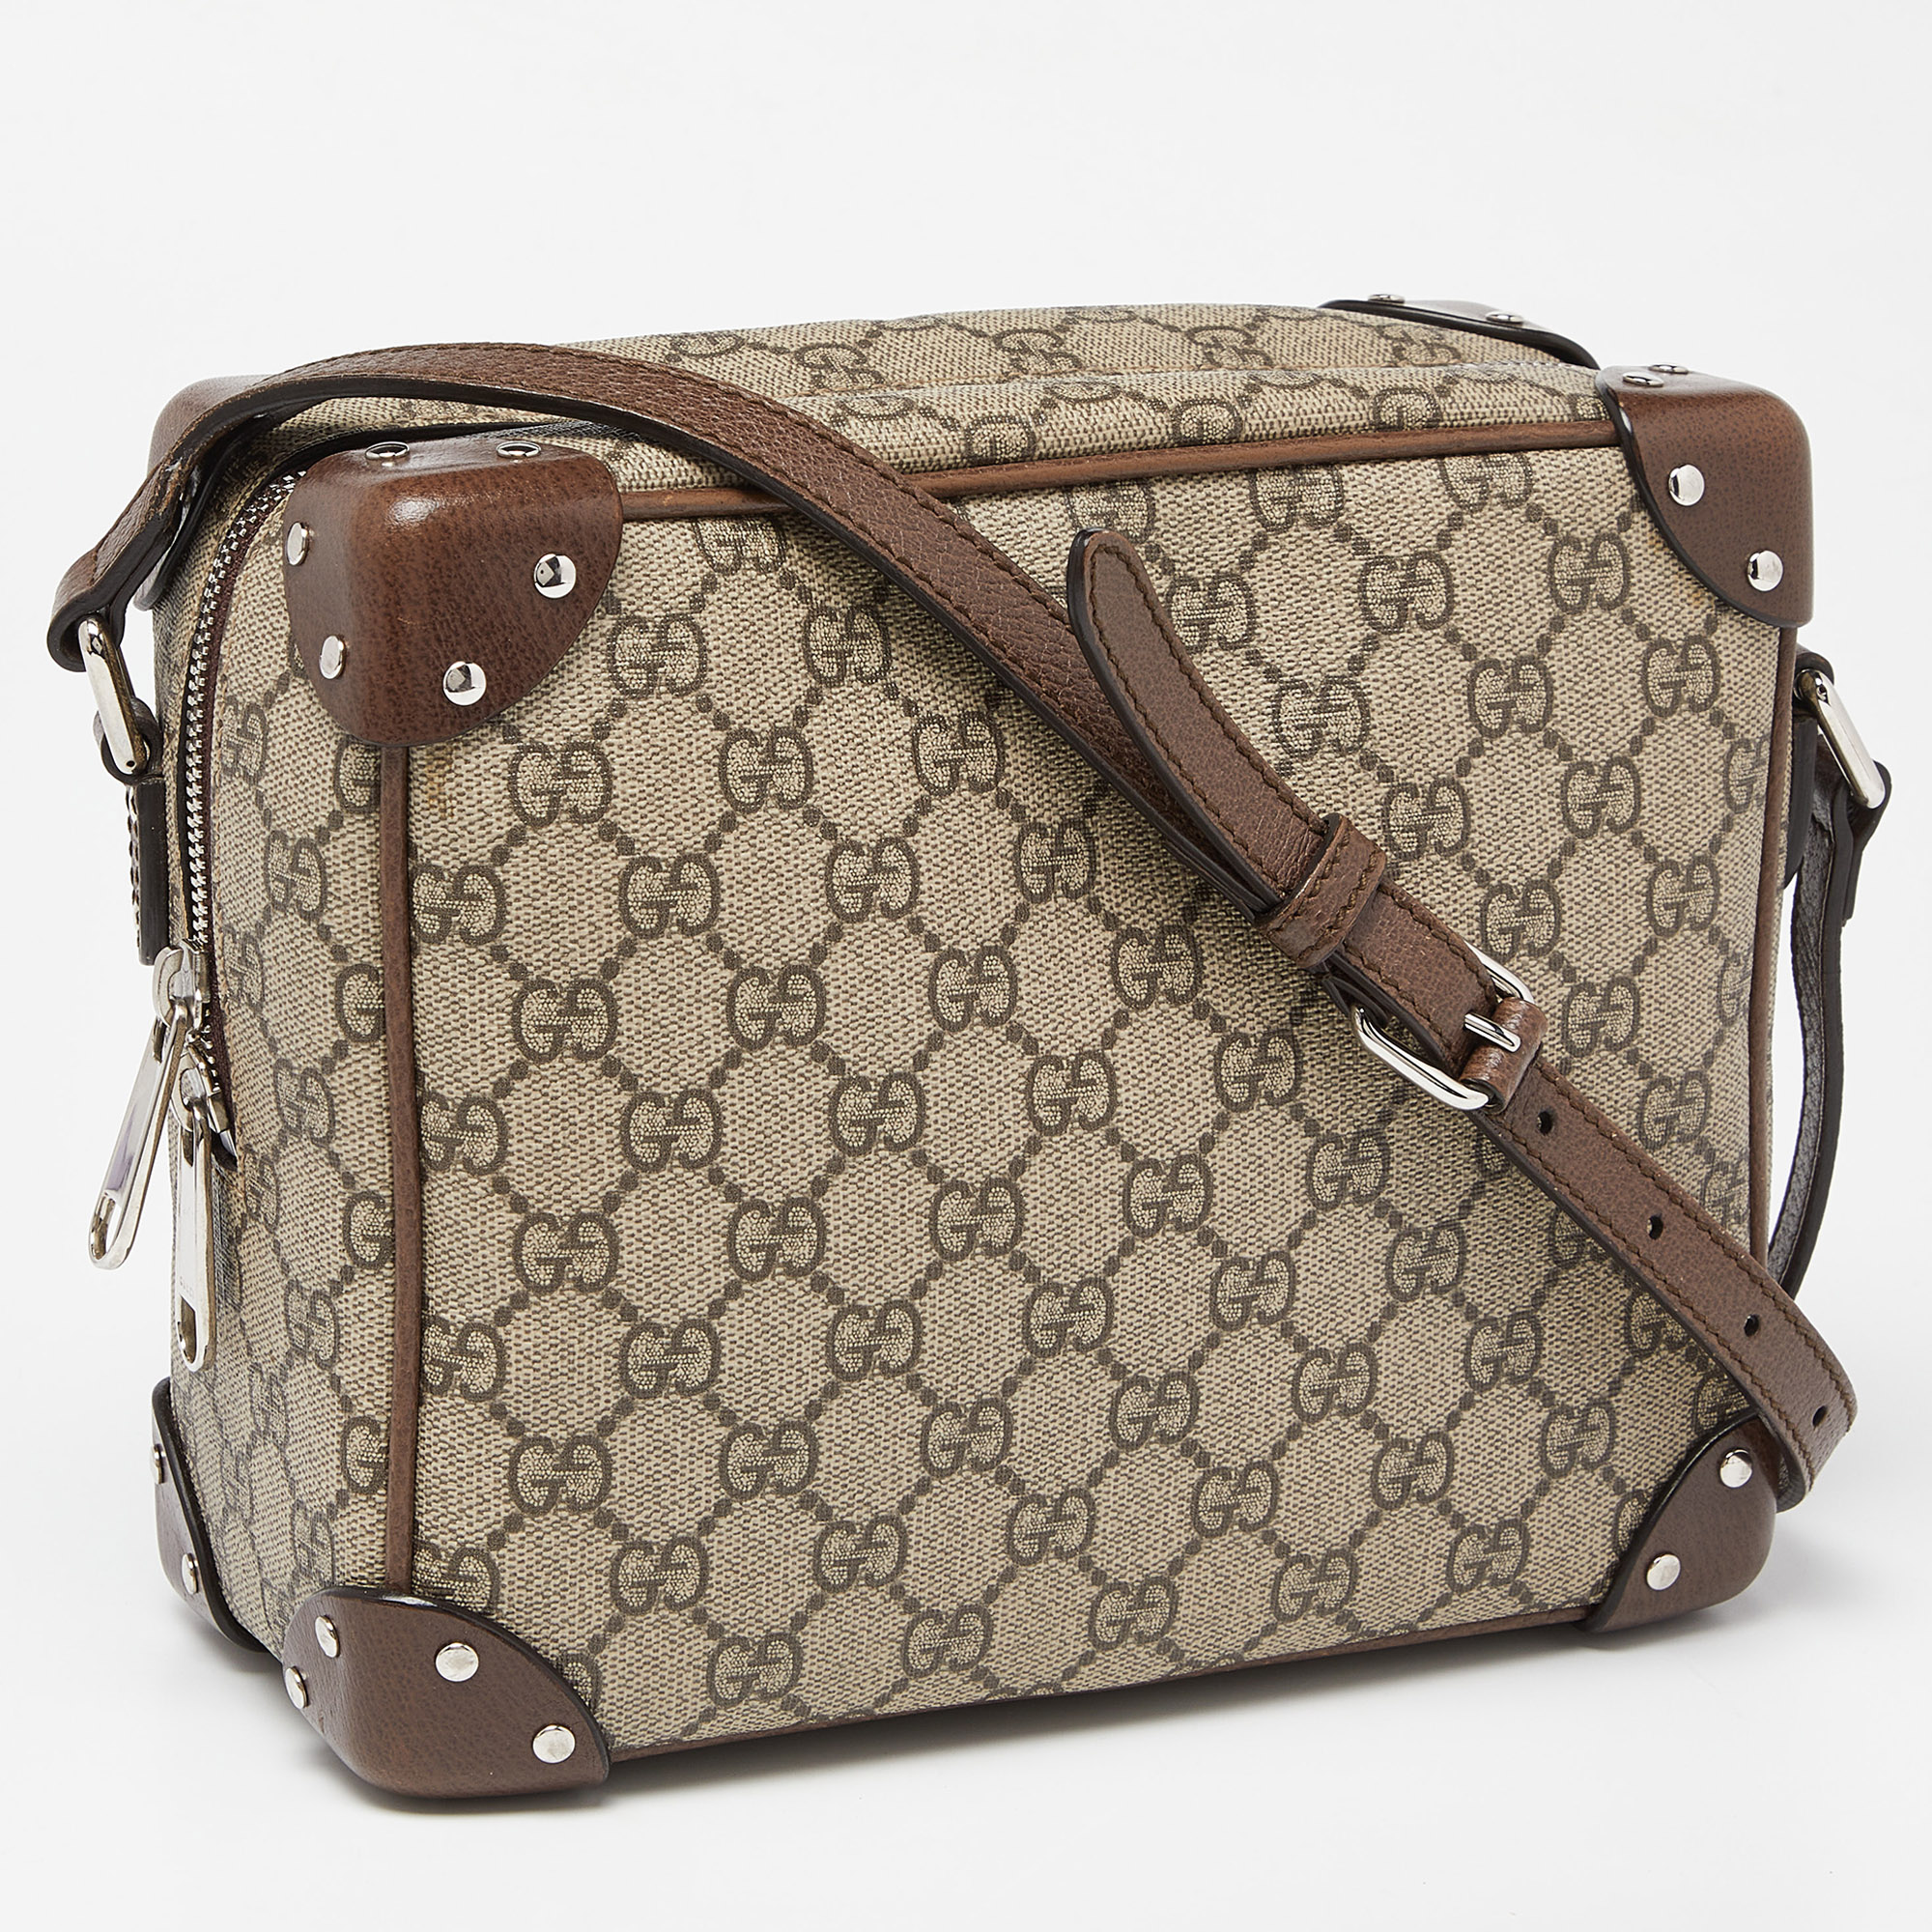 Gucci Brown/Beige GG Supreme Canvas And Leather Square Messenger Bag